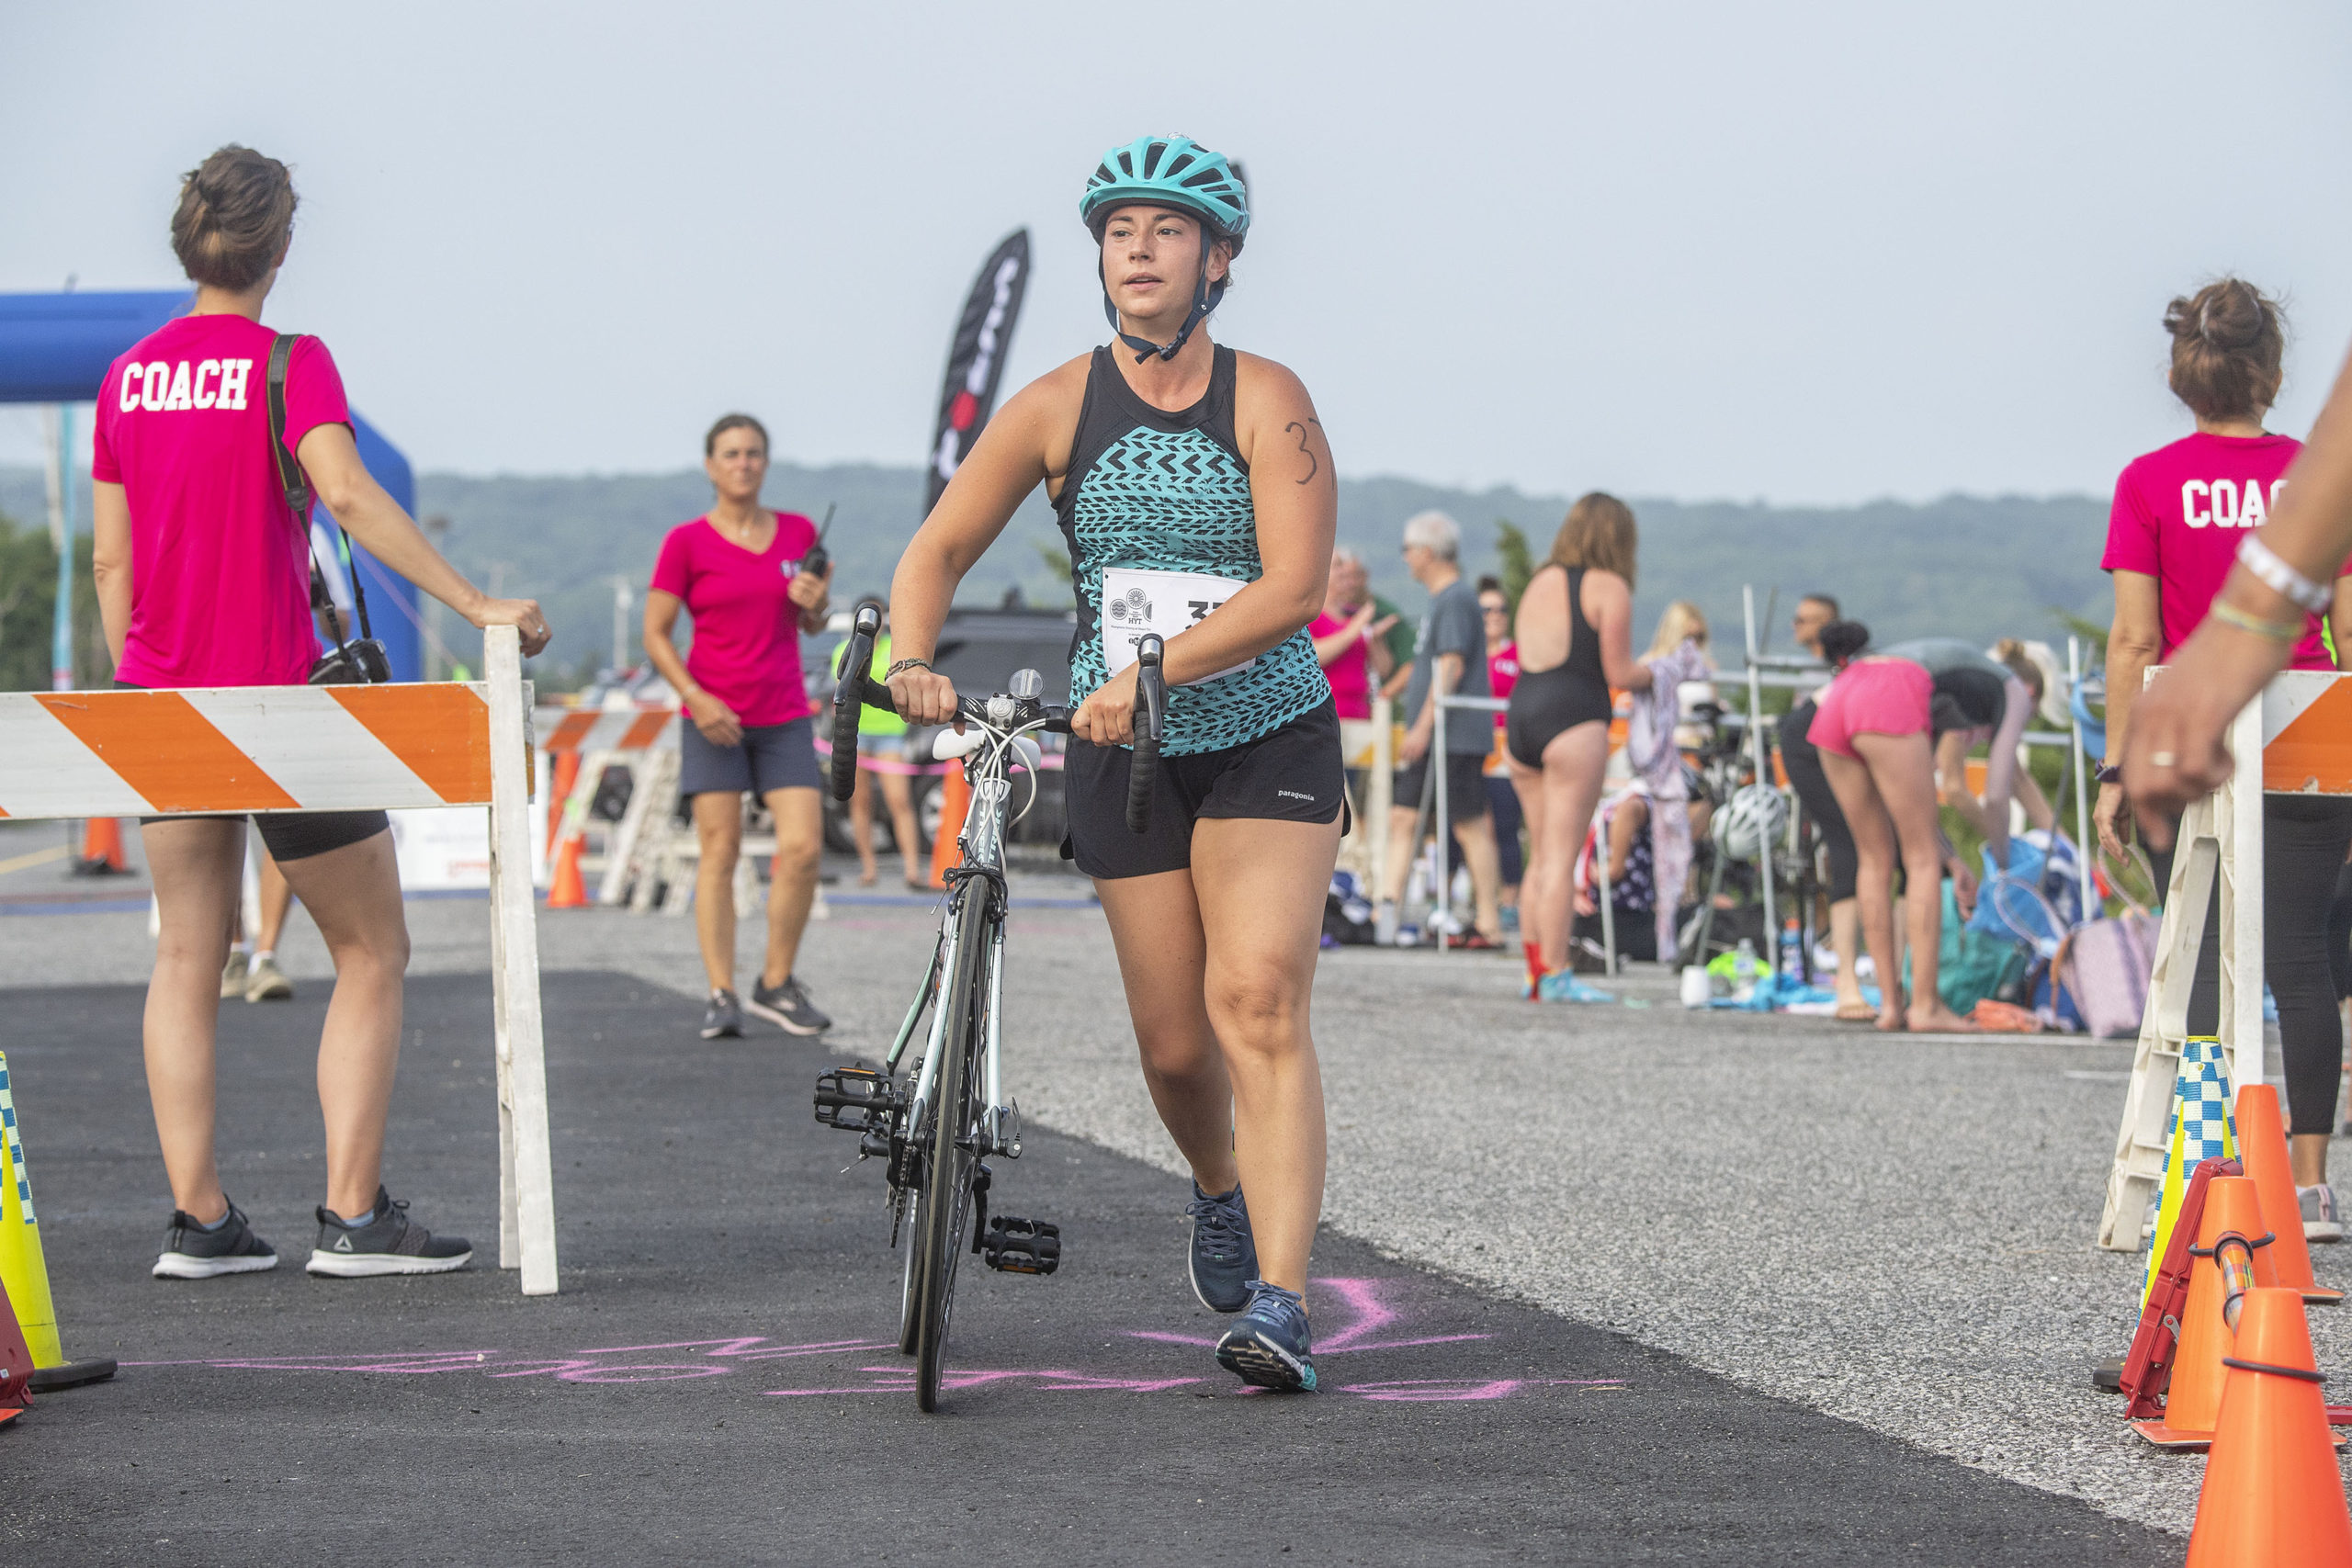 Competitors transition from swimming to biking for the second leg of the Hamptons Young at Heart Triathlon.